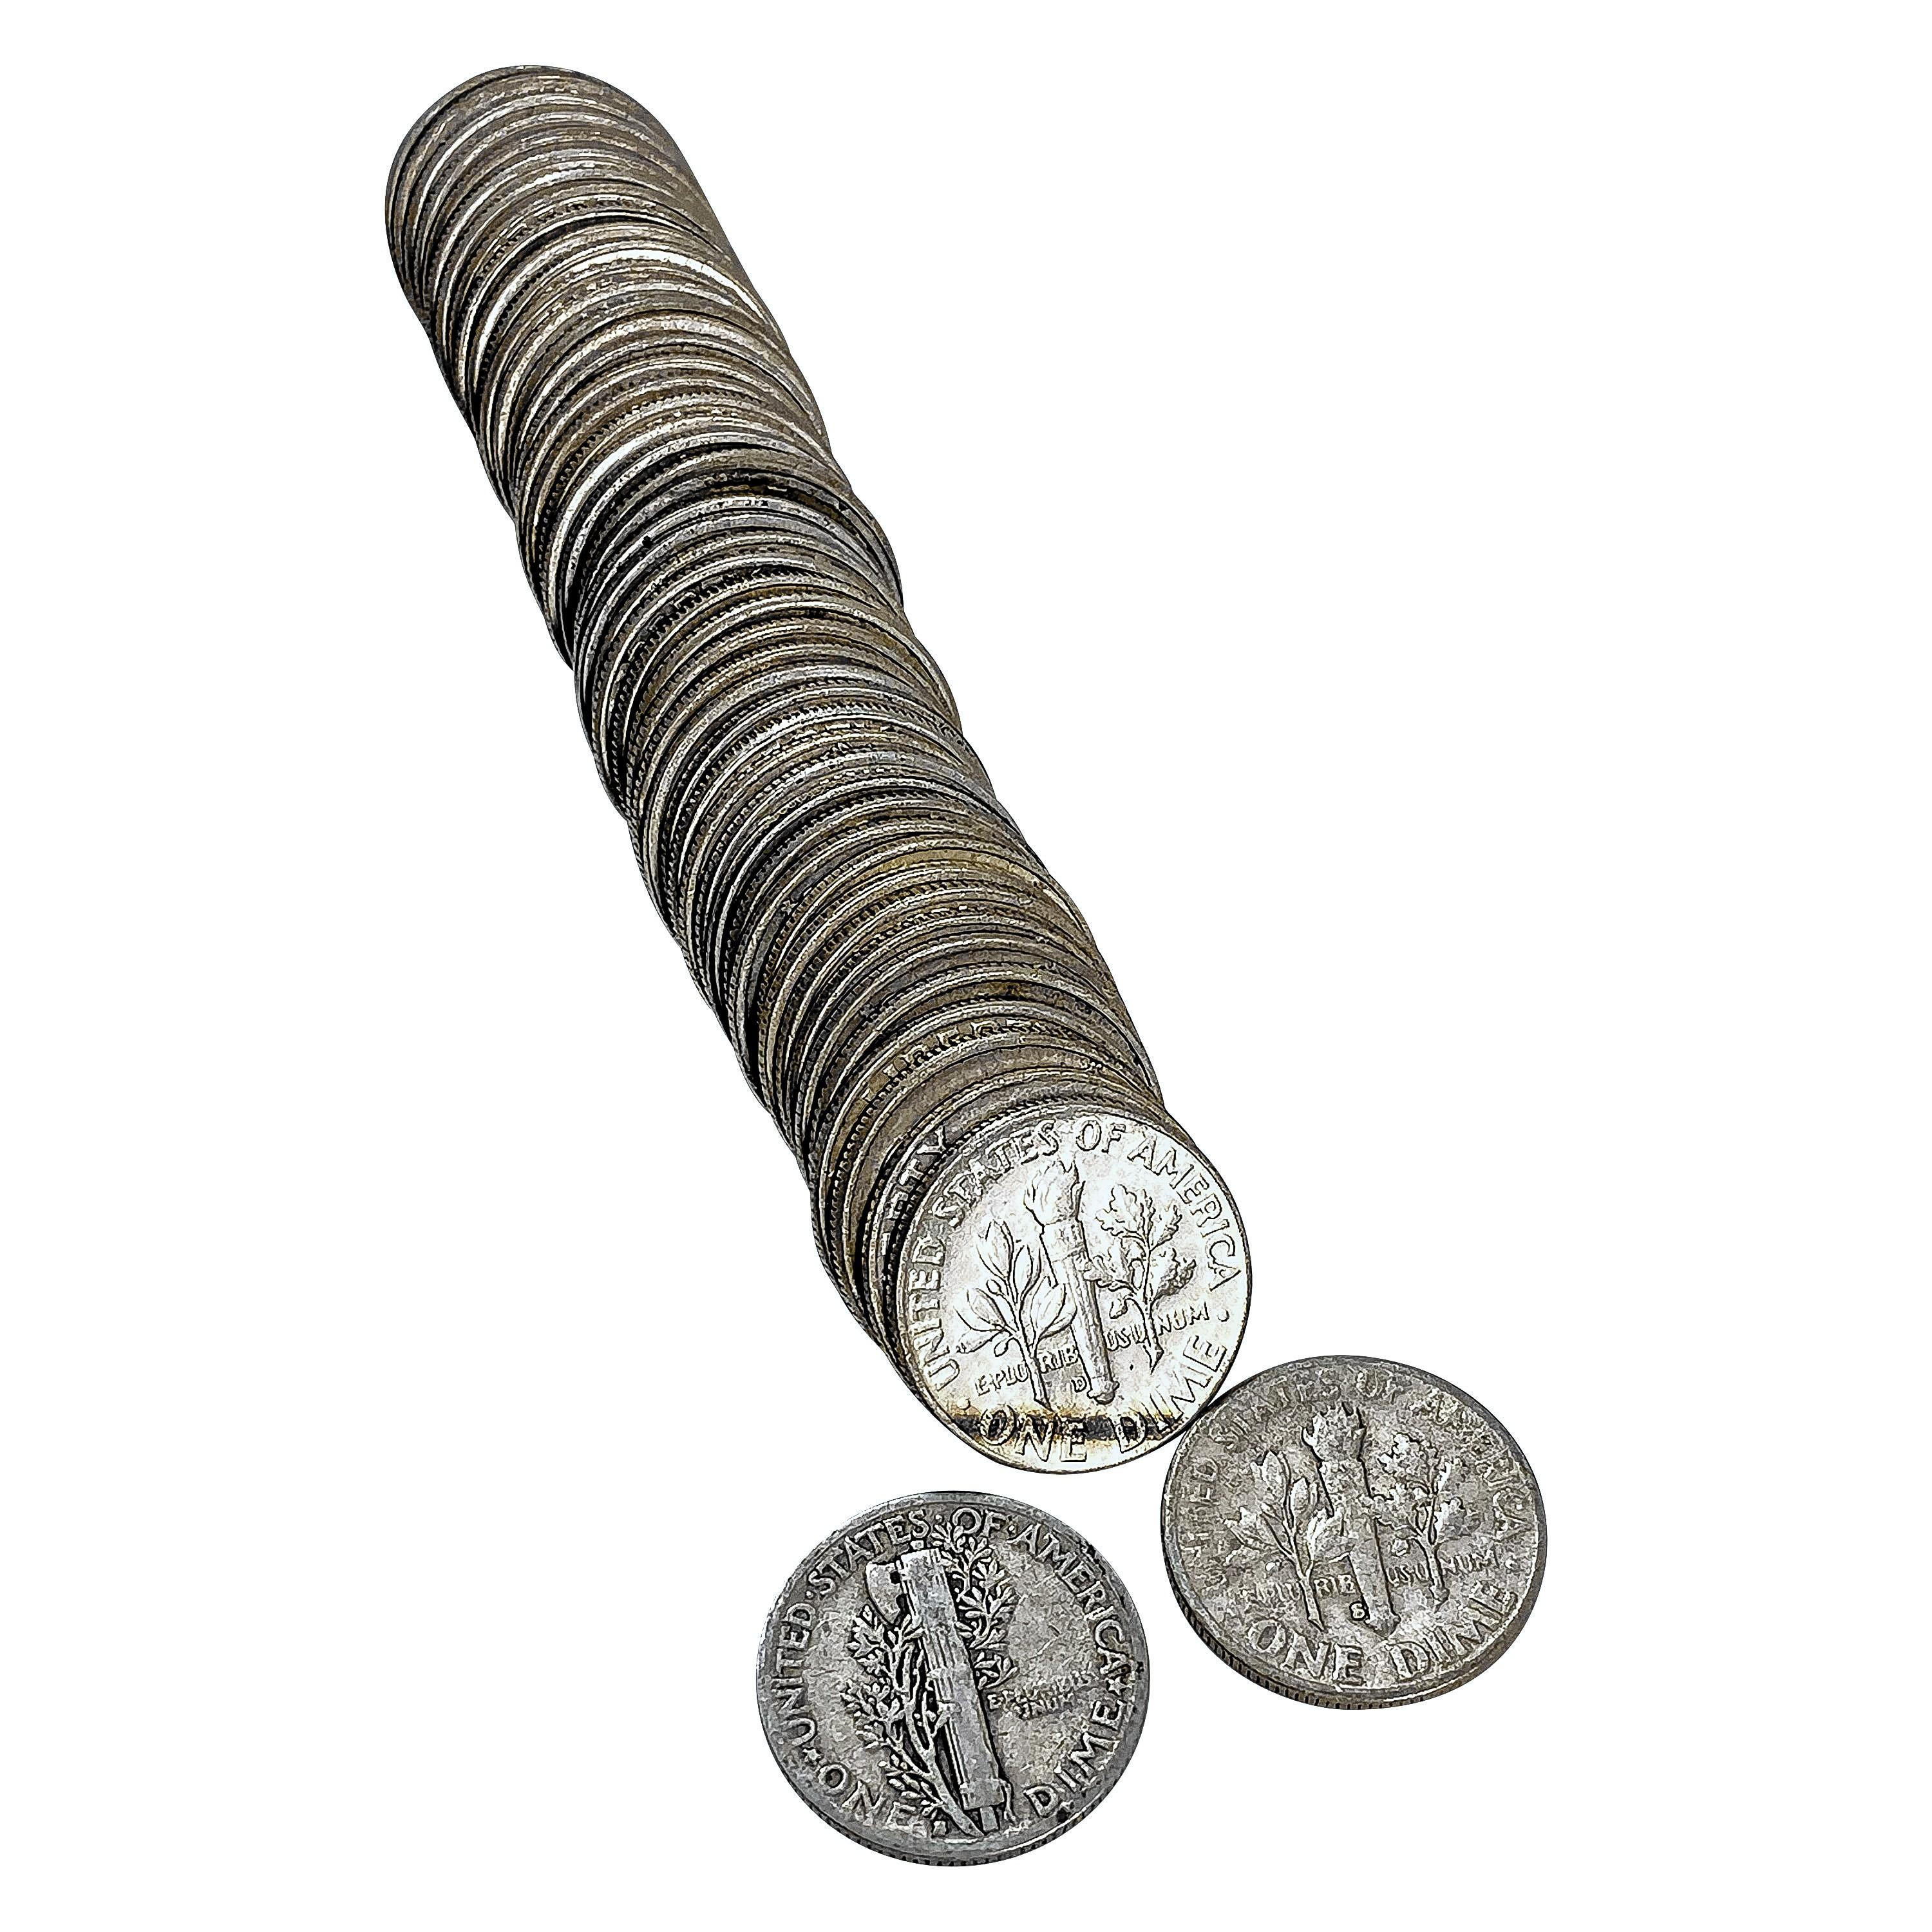 1943-1964 Mixed Roll of US Silver Dimes [50 Coins]